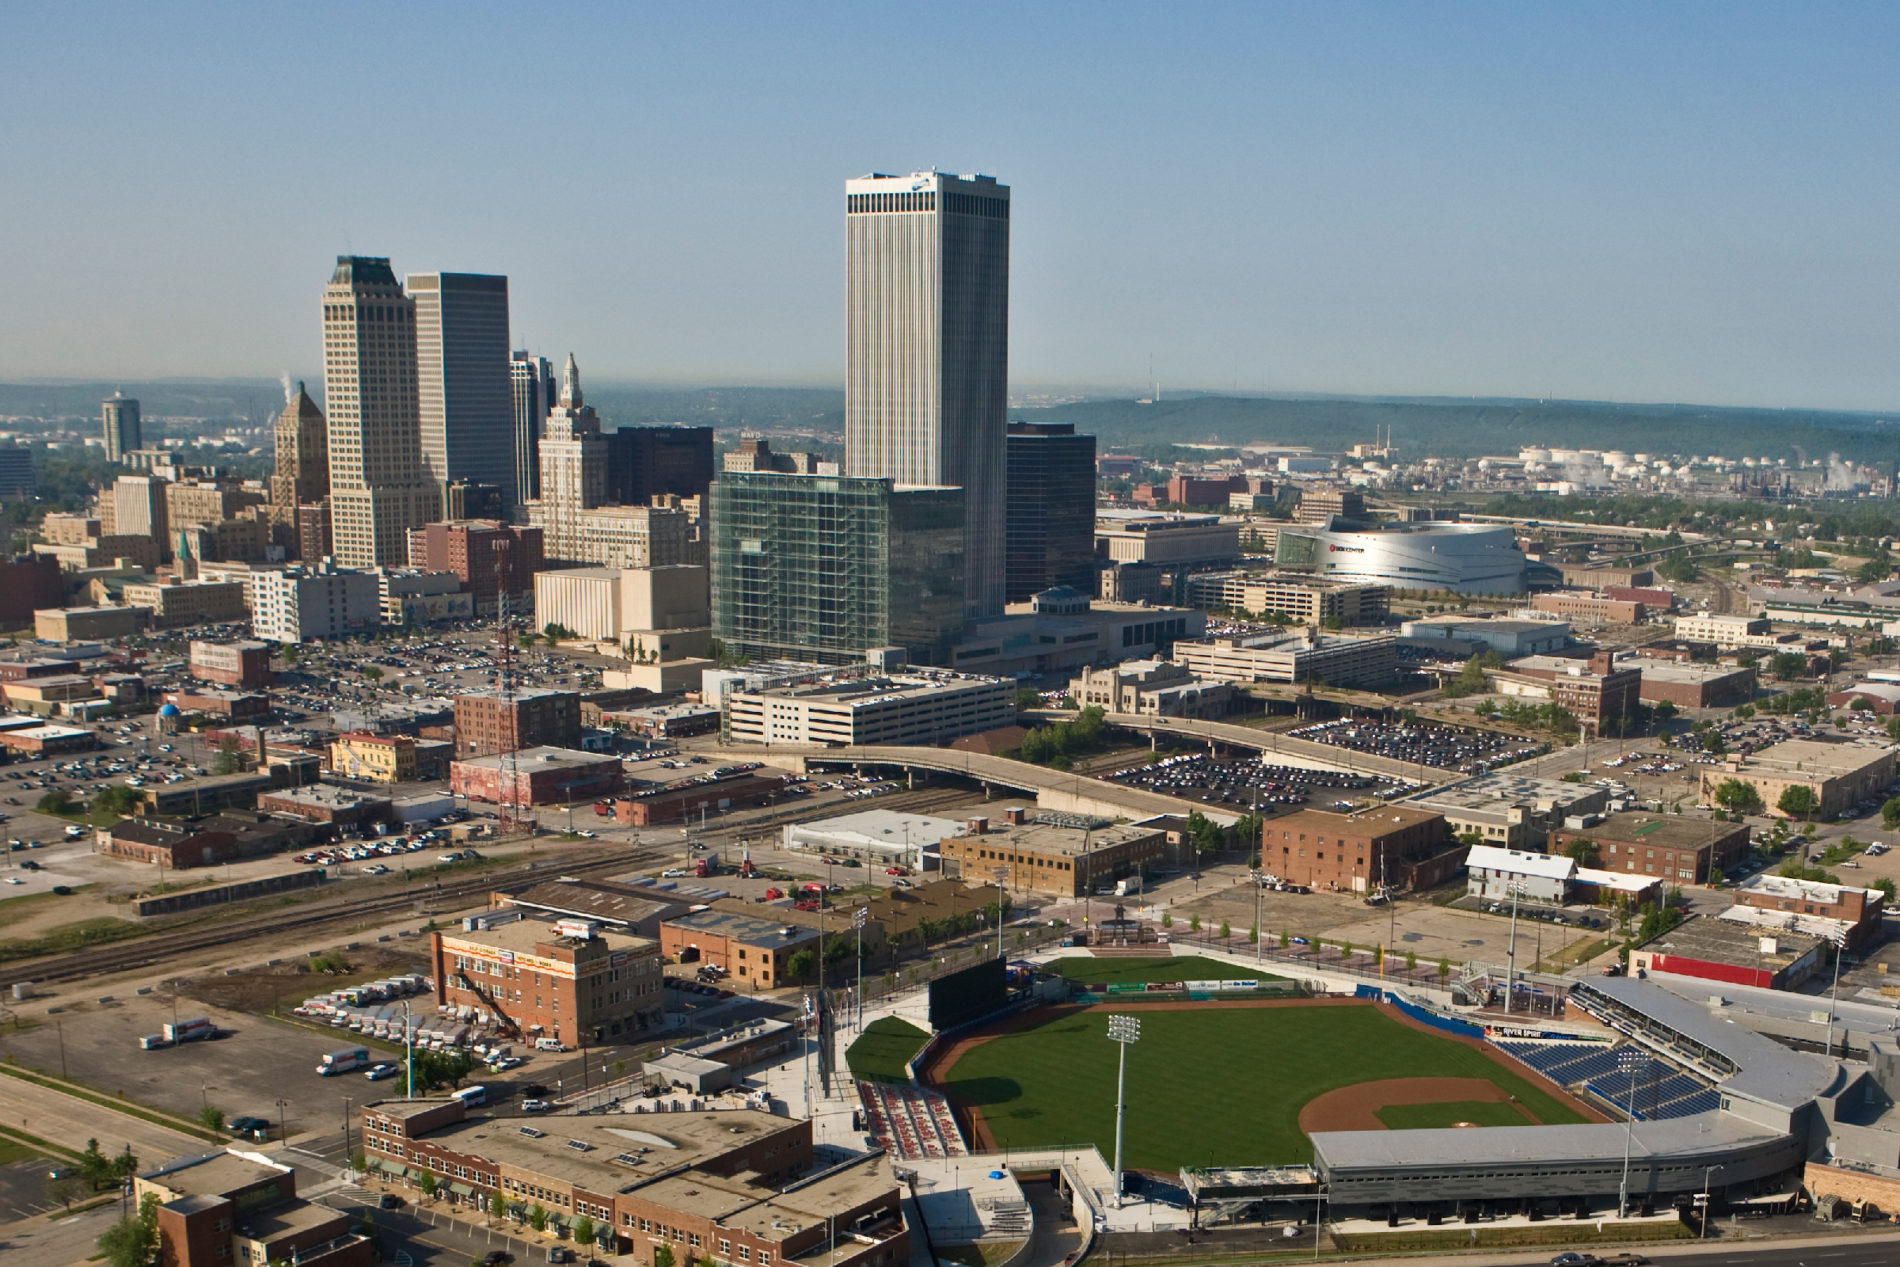 Aerial view of Tulsa skyline with the baseball field in the foreground